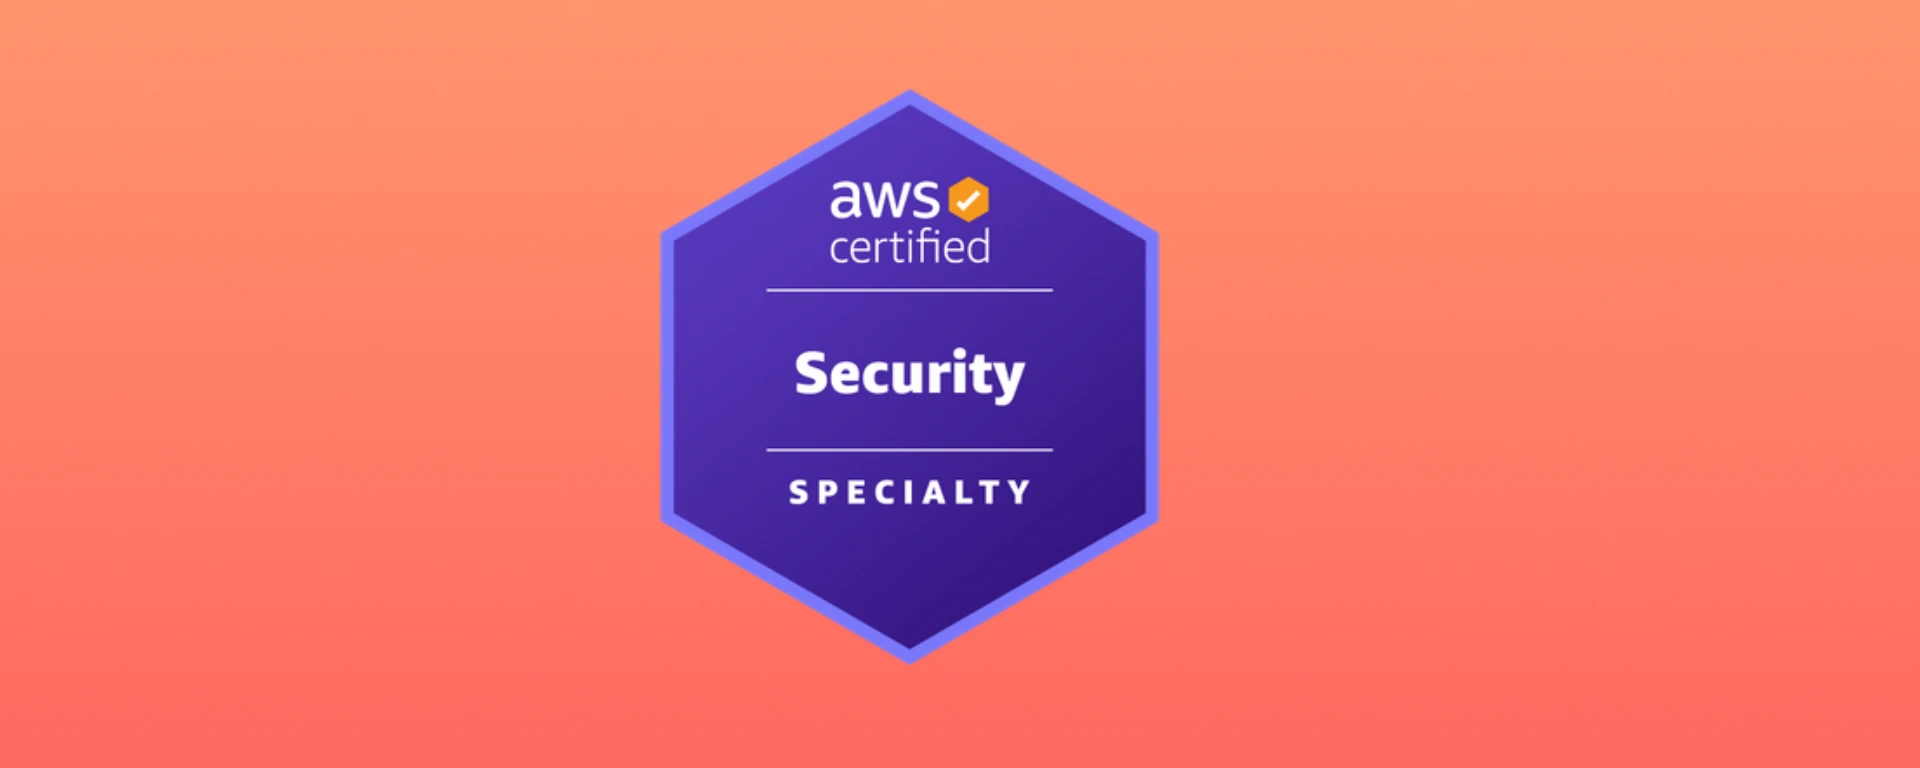 How to pass the AWS Security Specialty exam